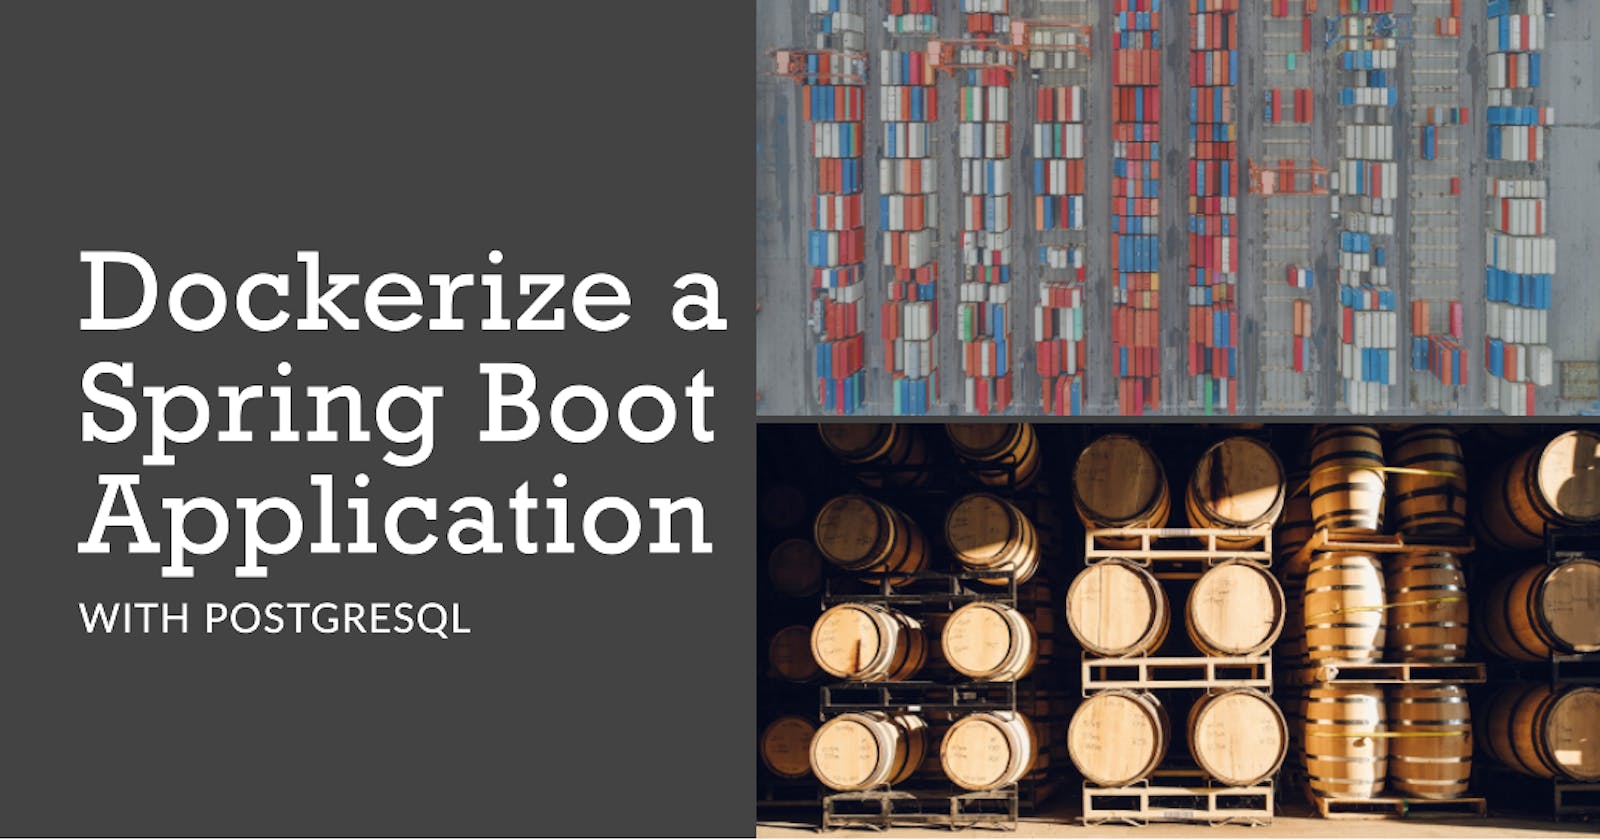 How to Dockerize a Spring Boot App with PostgreSQL